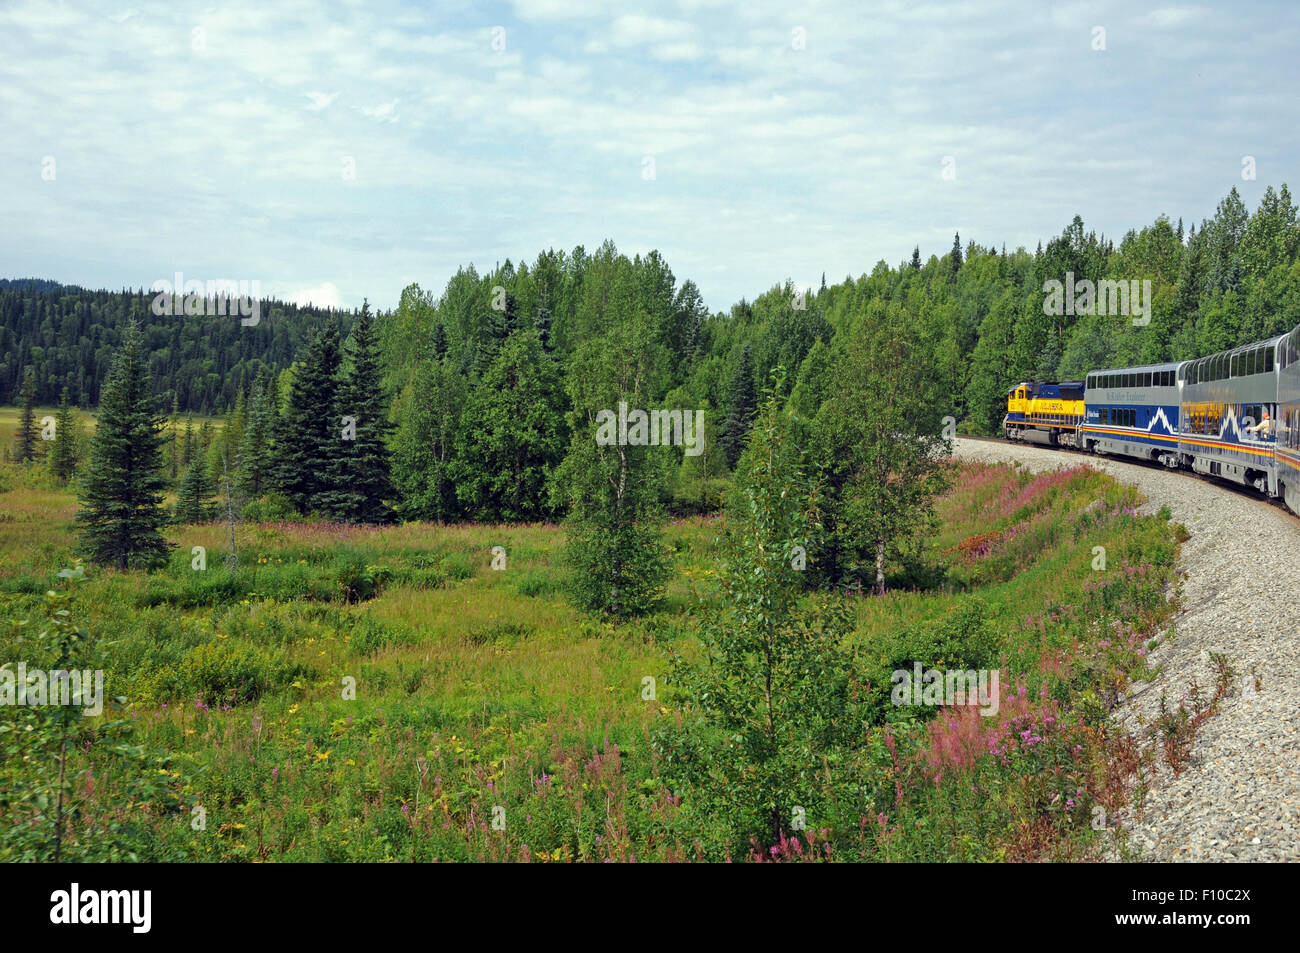 Alaska RR rounds a bend near a field of pine trees and purple fire weed near Denali National Park Stock Photo